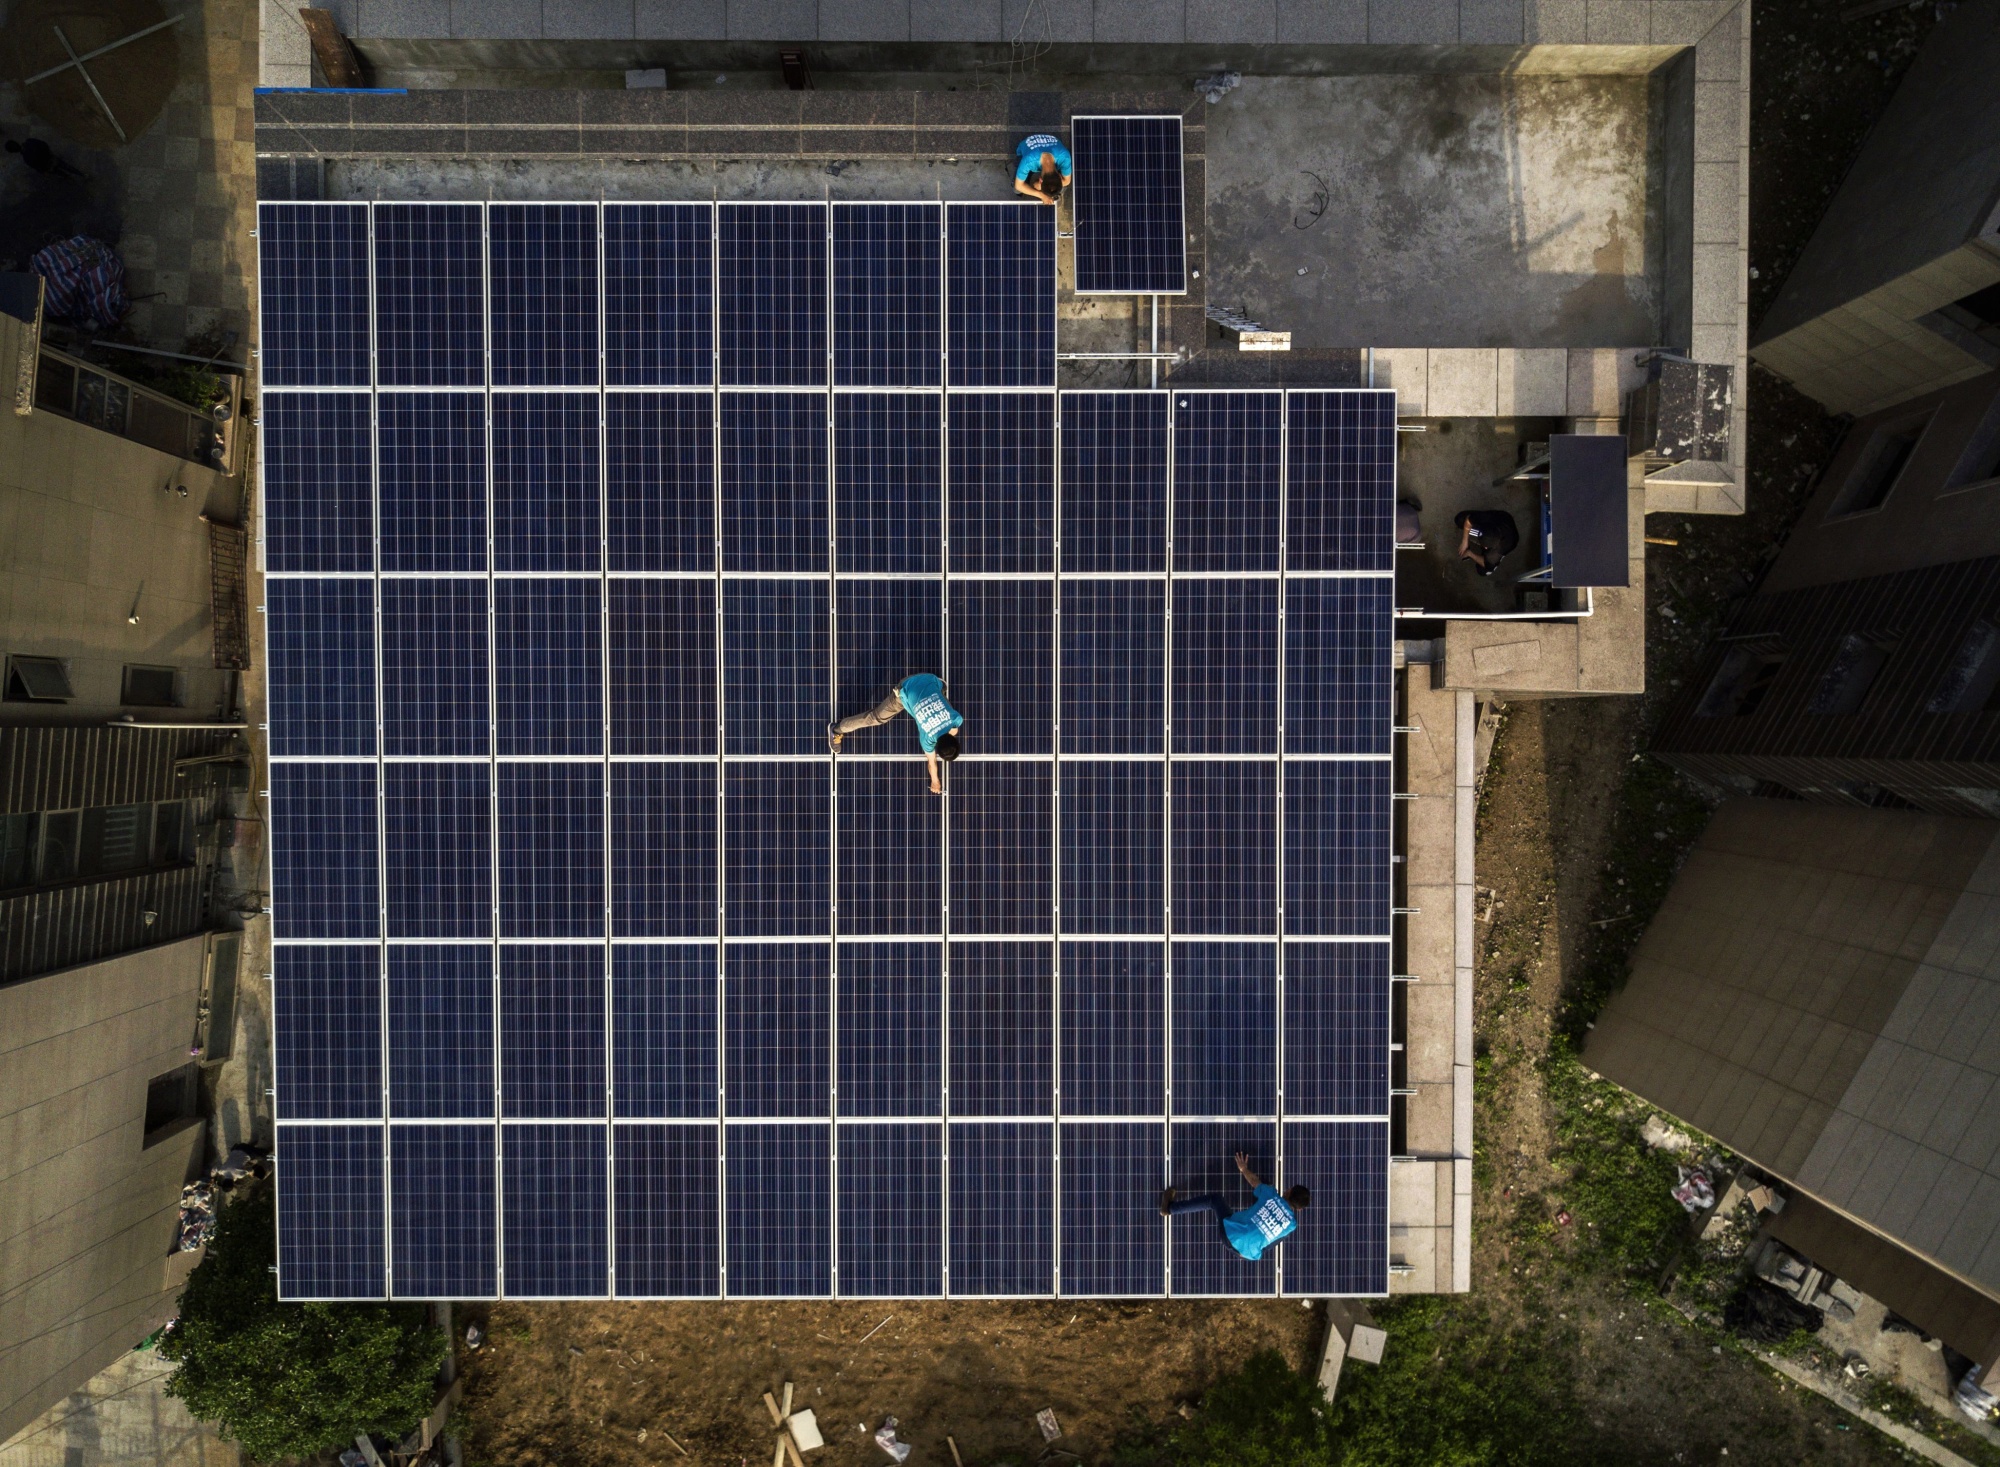 Solar panels being installed on a rooftop in Wuhan.